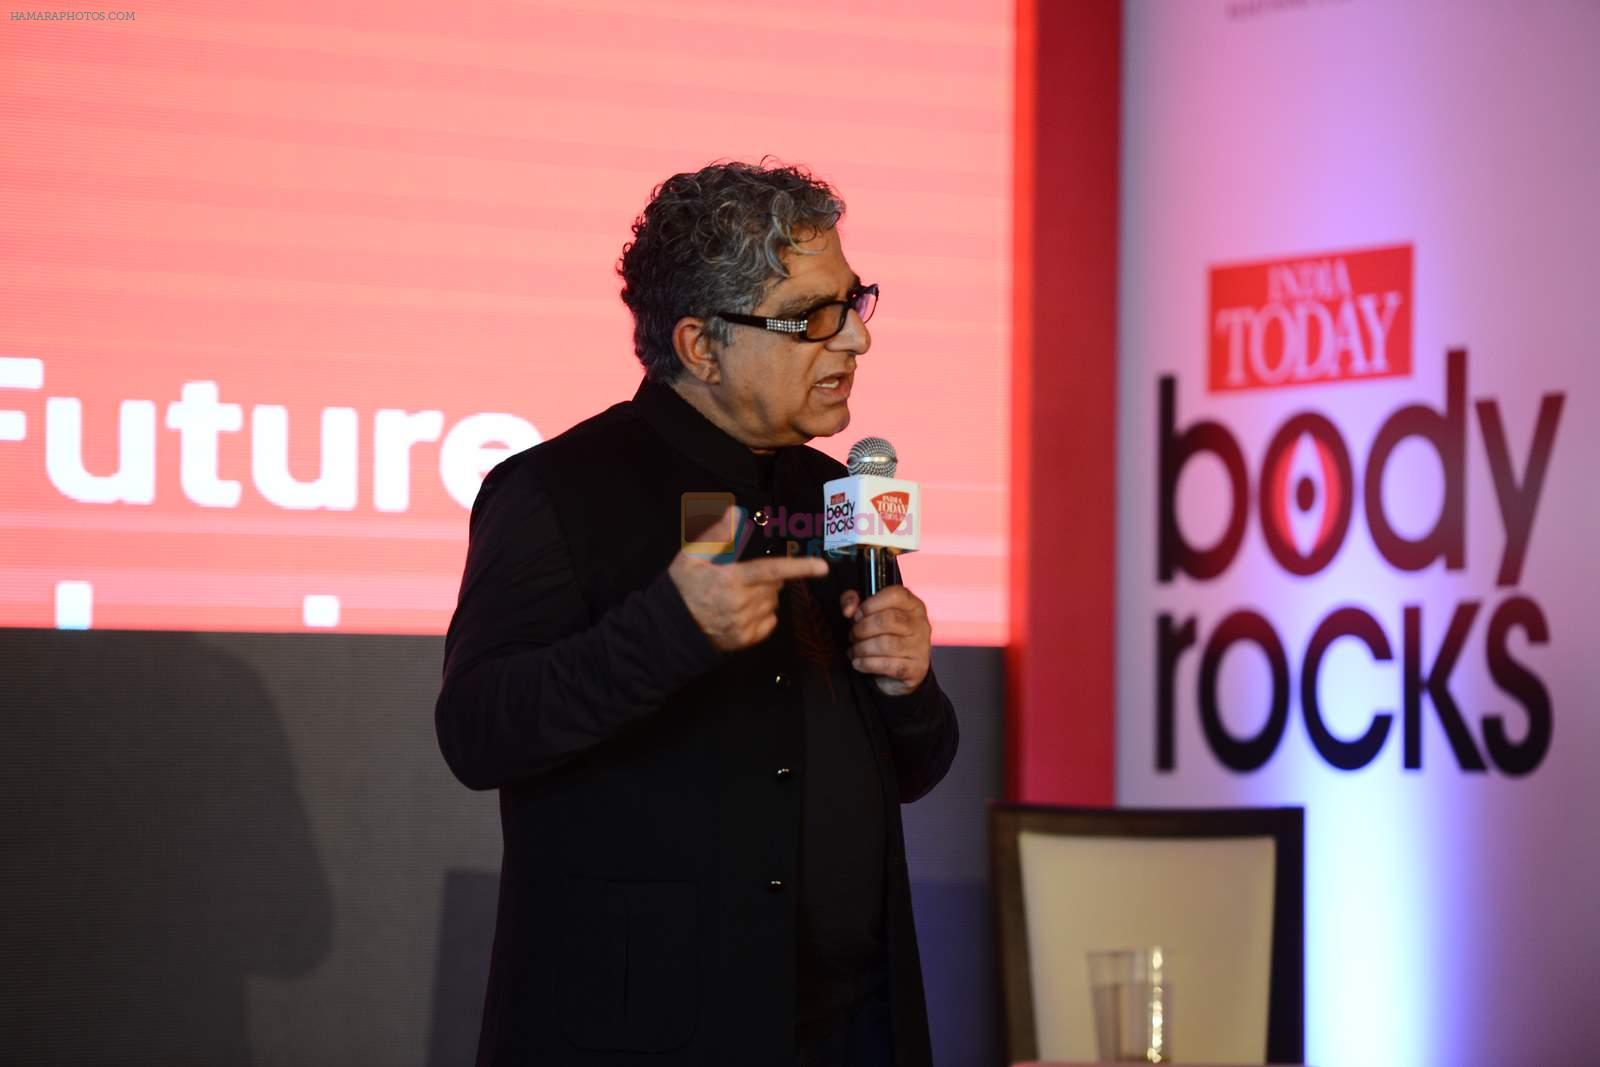 at India Today Body Rocks in J W Marriott on 15th March 2015